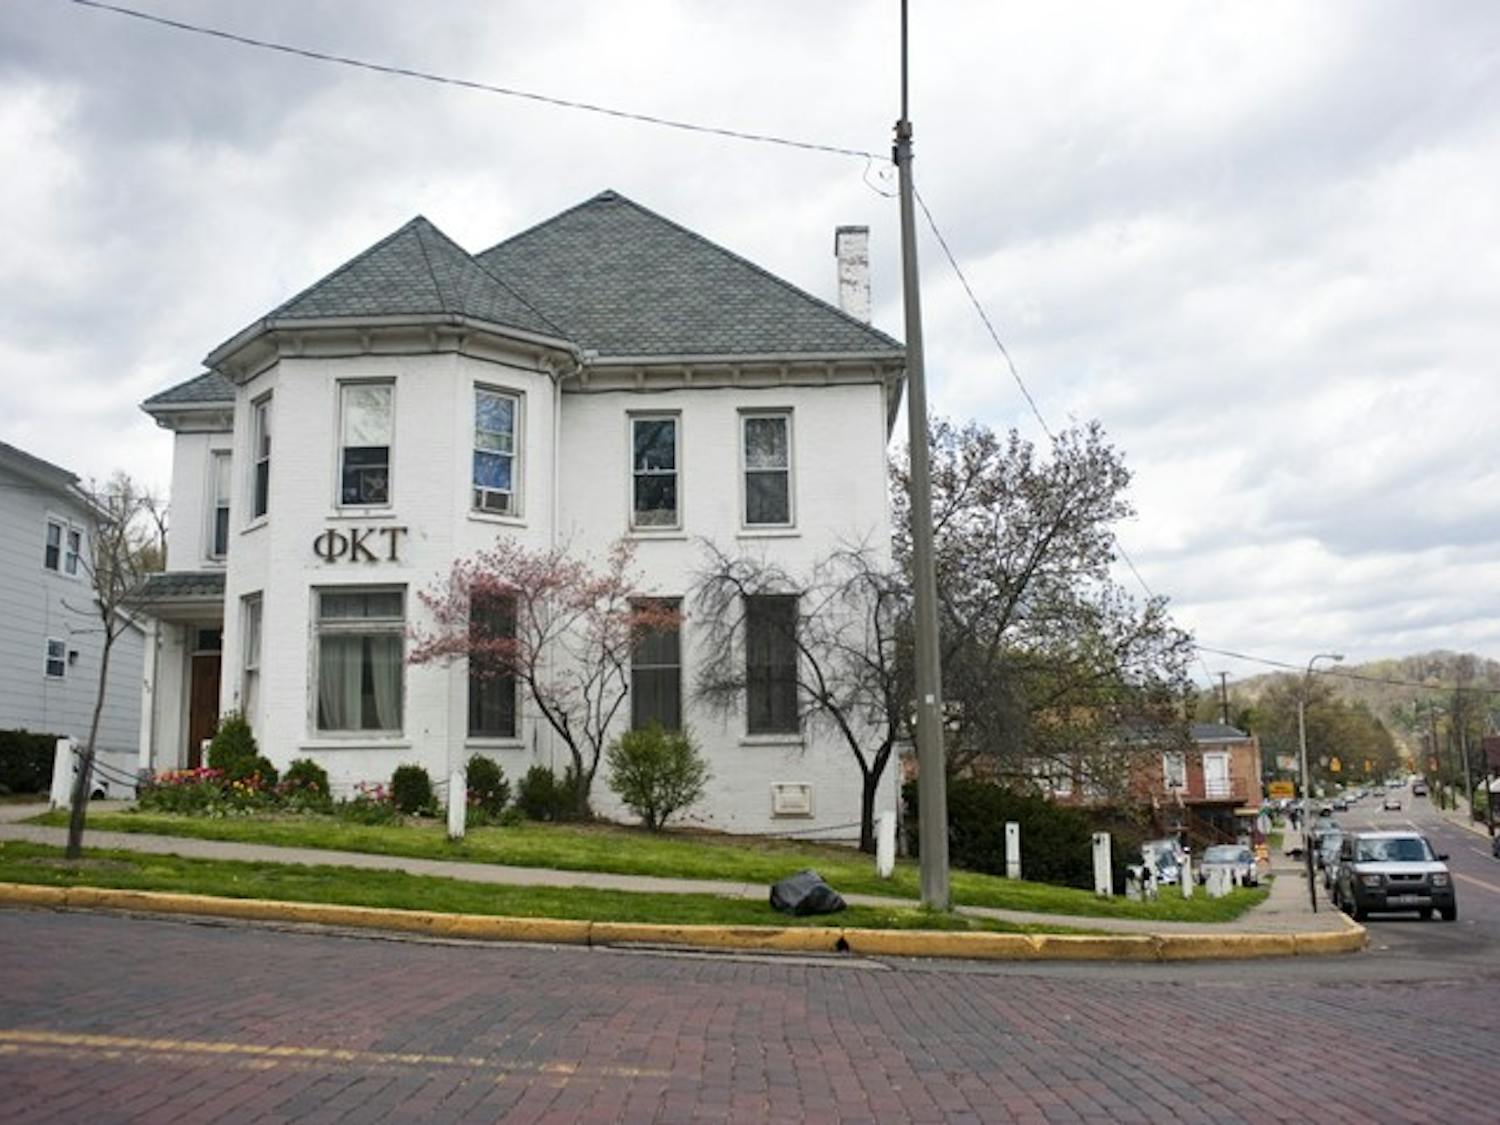 Police investigating report of sexual assault at Phi Kappa Tau house  